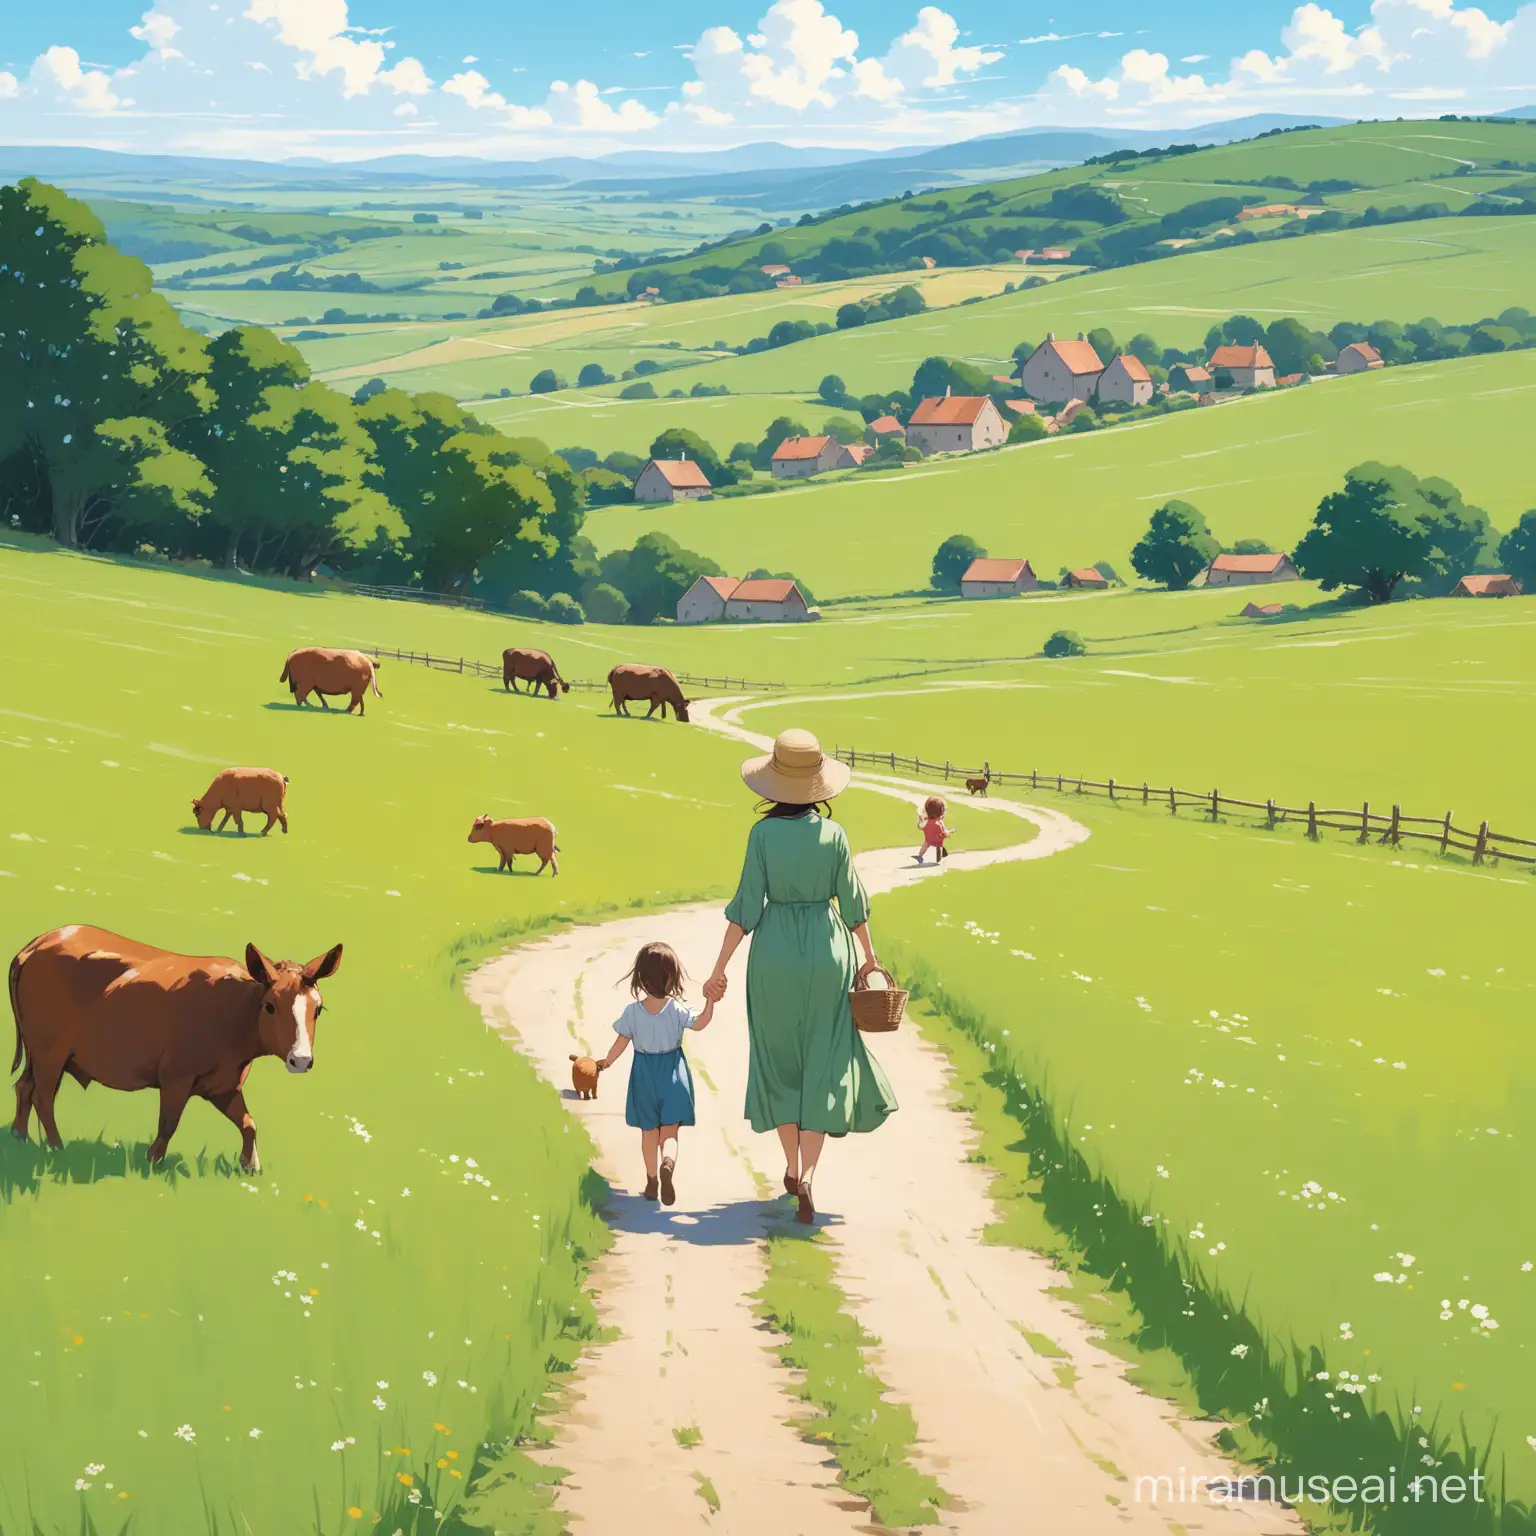 mother and a child holding hand, walking down the beautiful countryside , green plain, and some animals in the background
